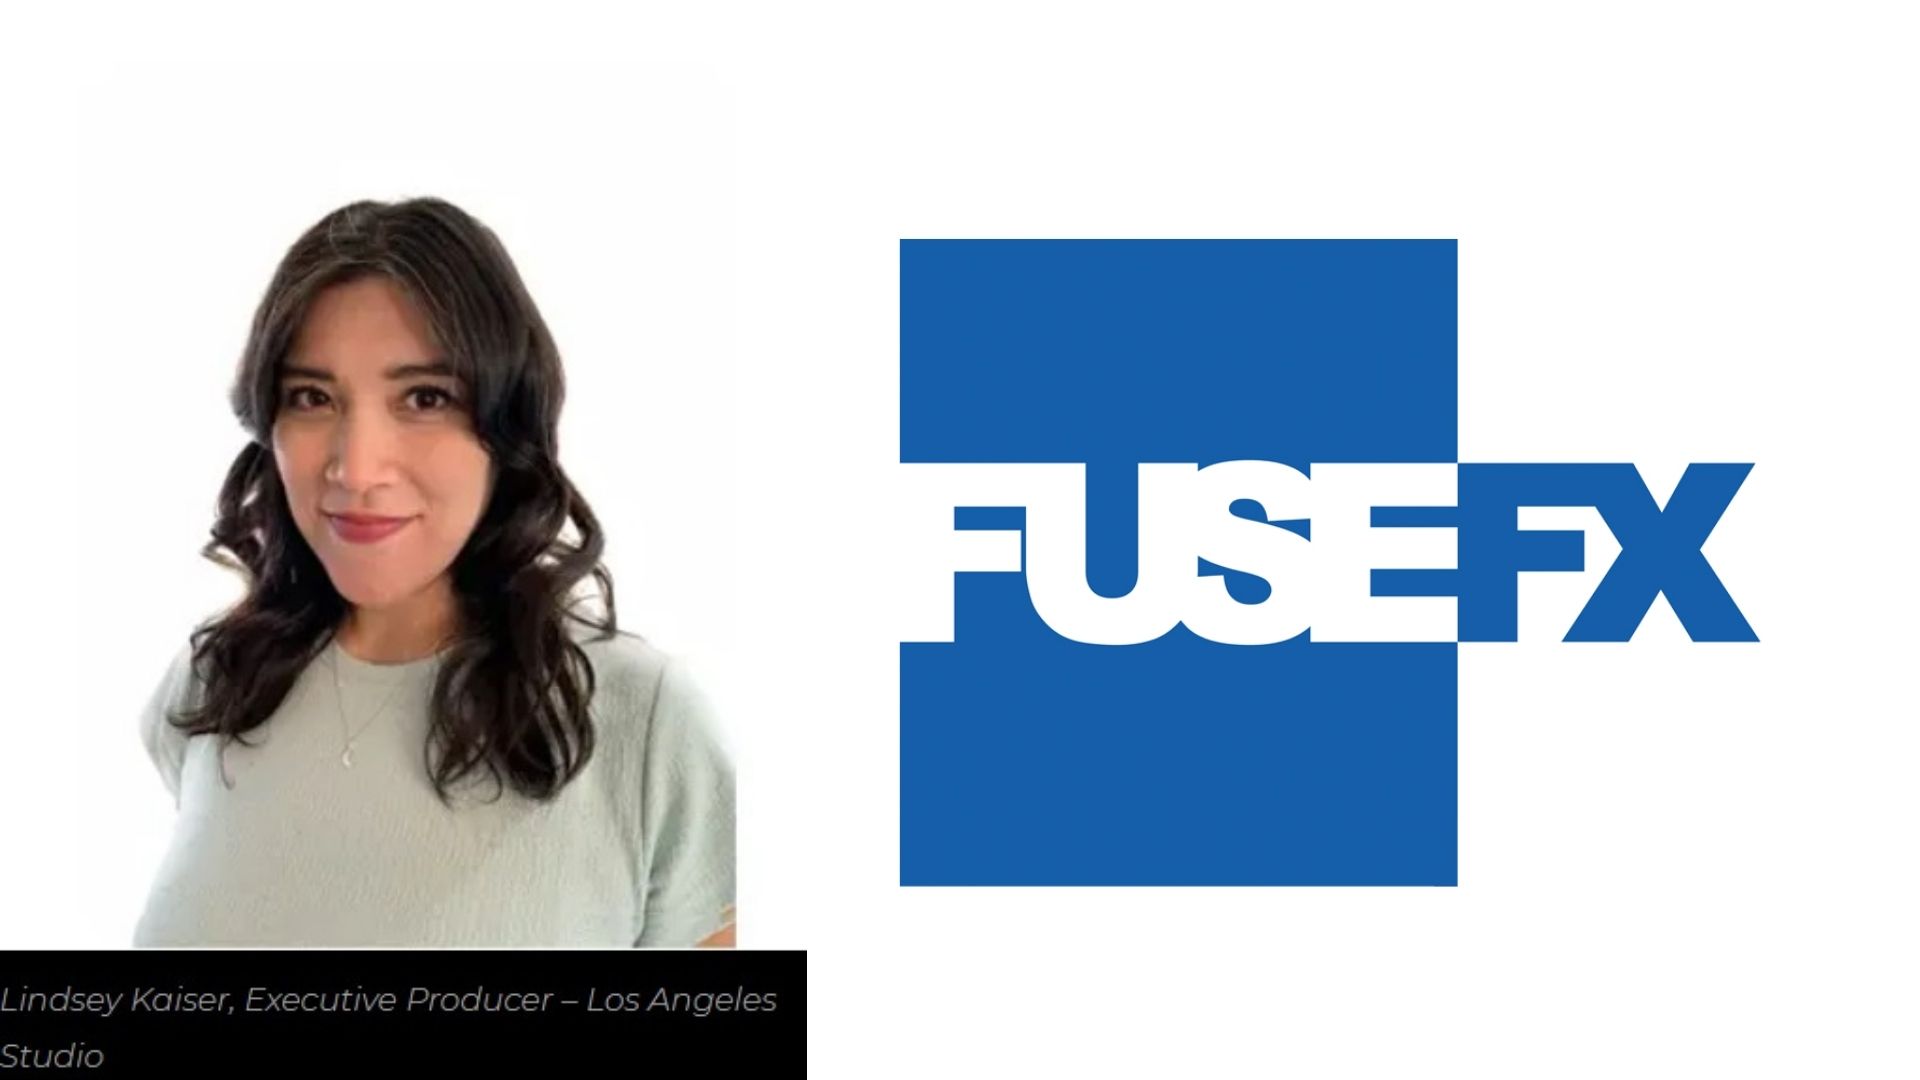 FuseFX continues to Grow Global Strategy with Significant Staffing Changes in Los Angeles Office